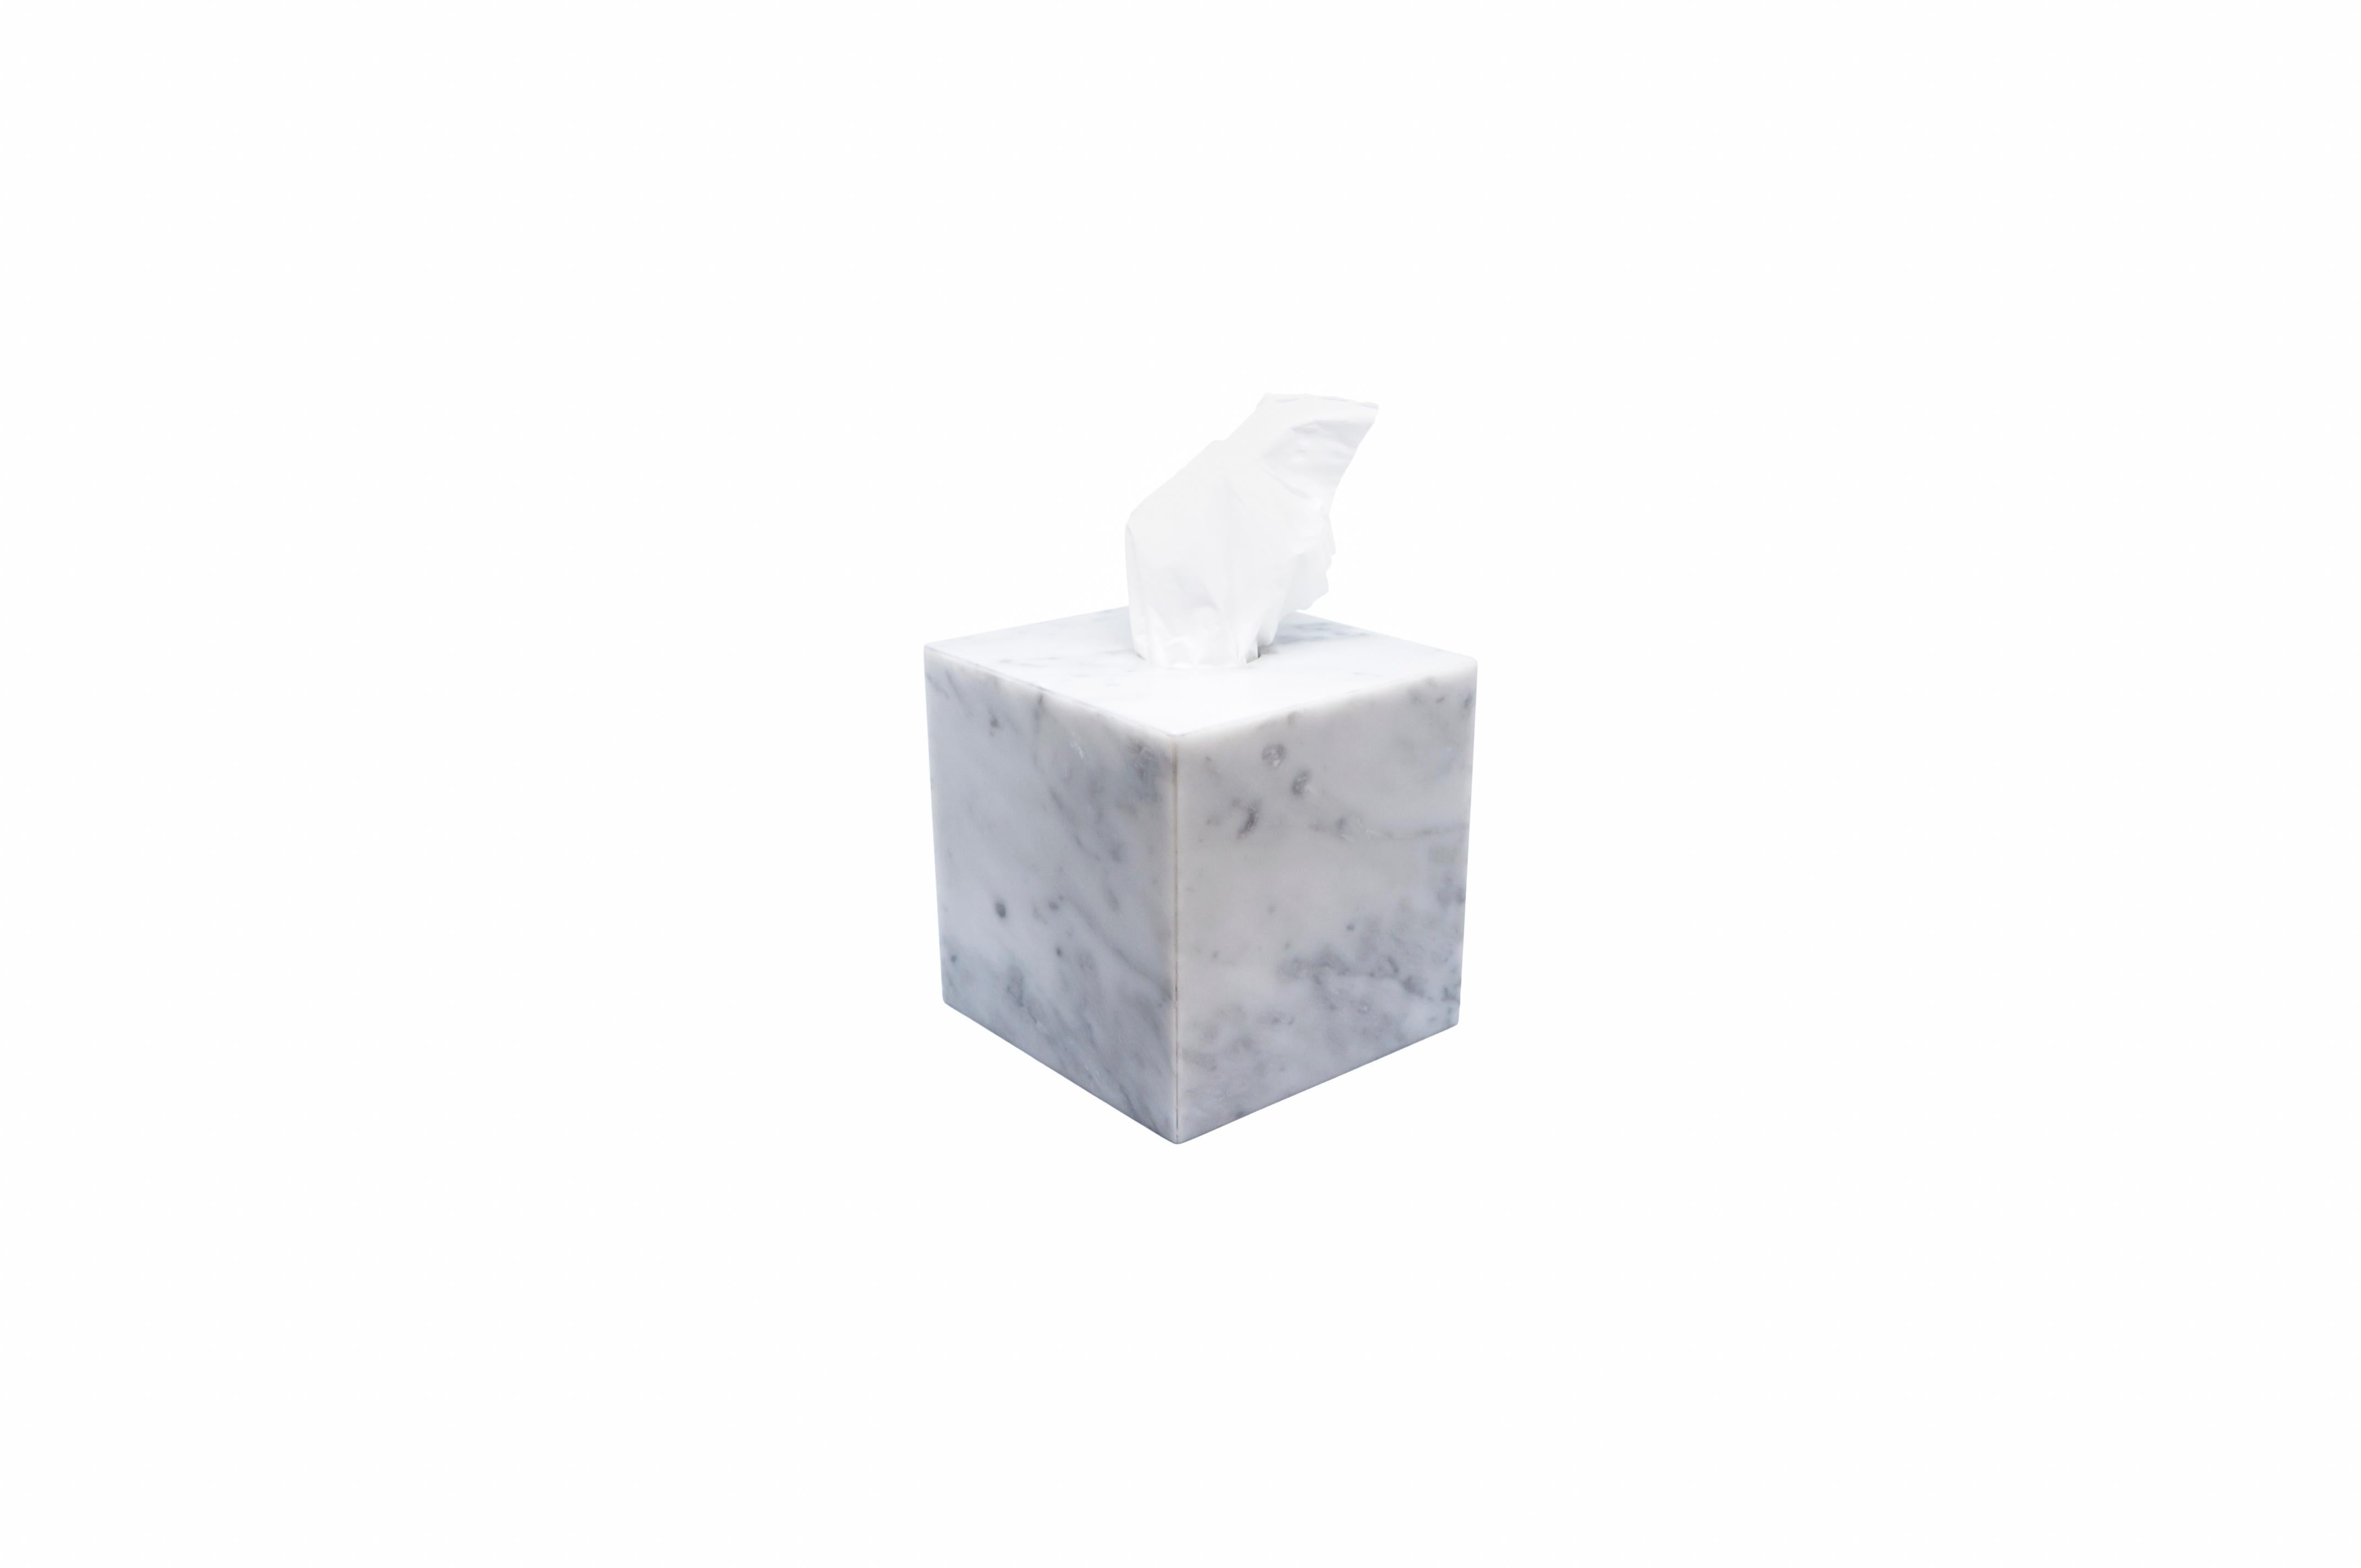 Italian Squared Tissues Cover Box in Marble